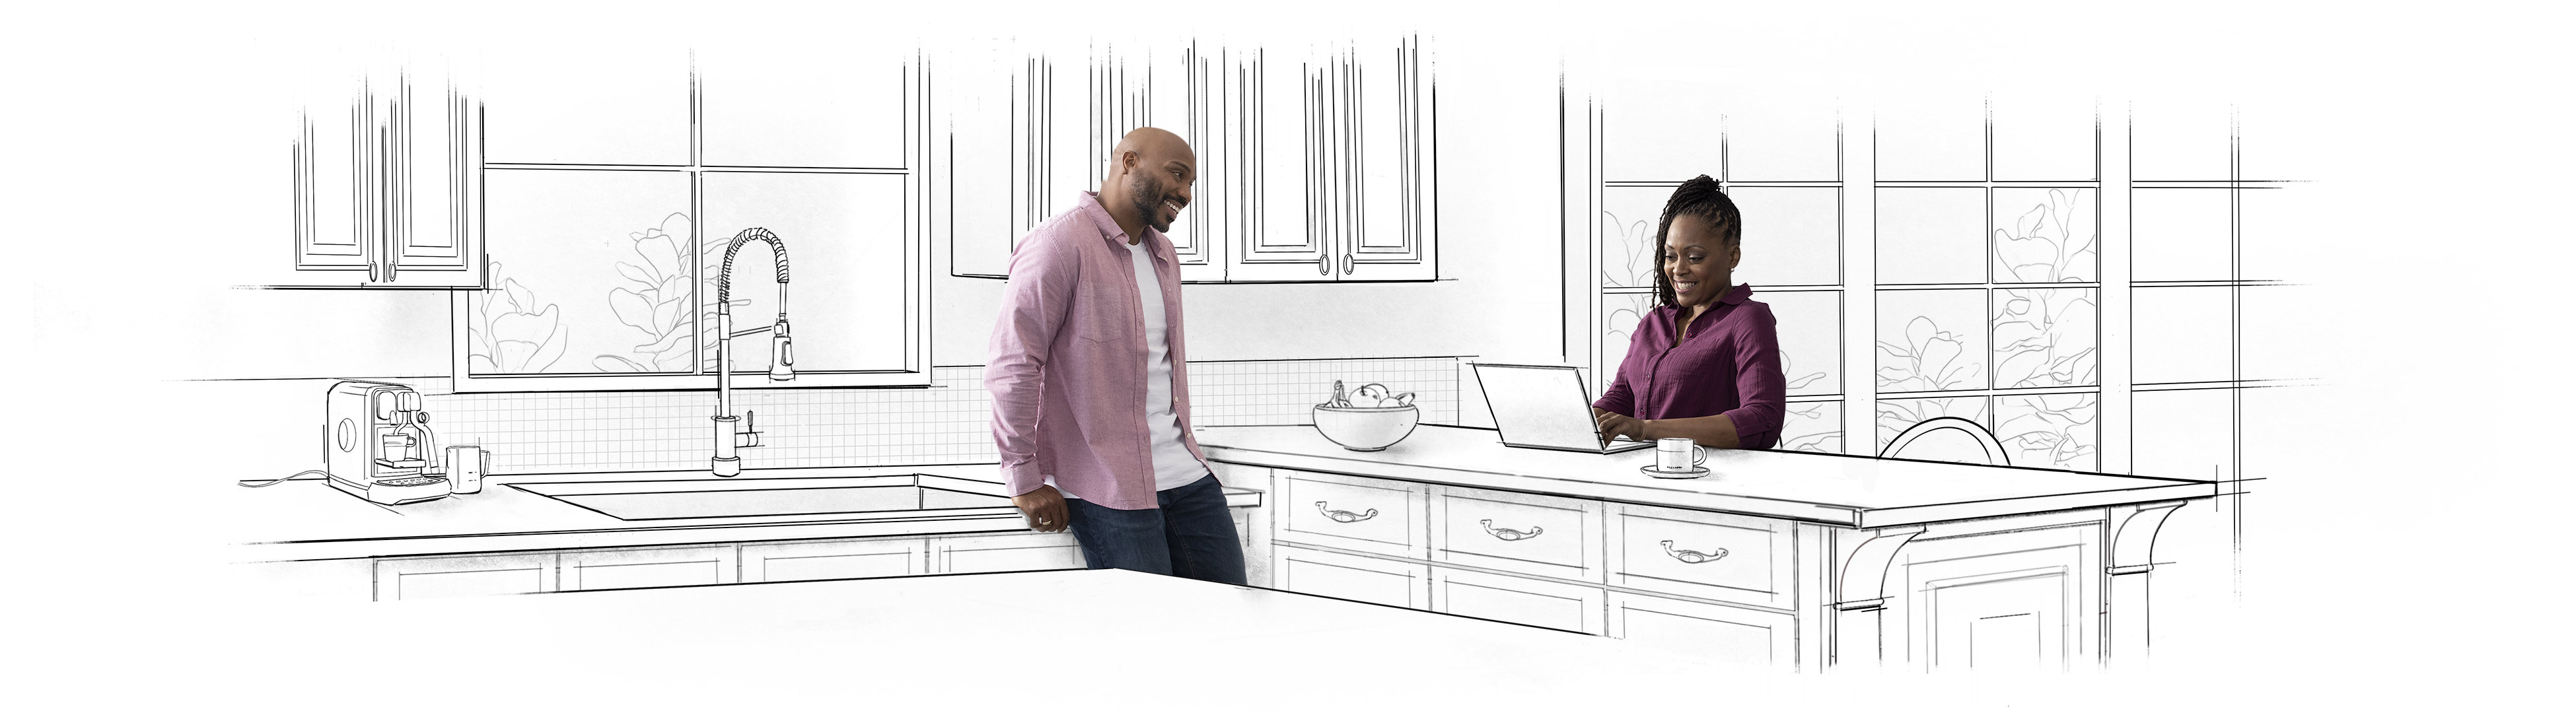 Two people in a kitchen. One uses a laptop. Their surroundings are sketched; the inclusion journey at Microsoft.